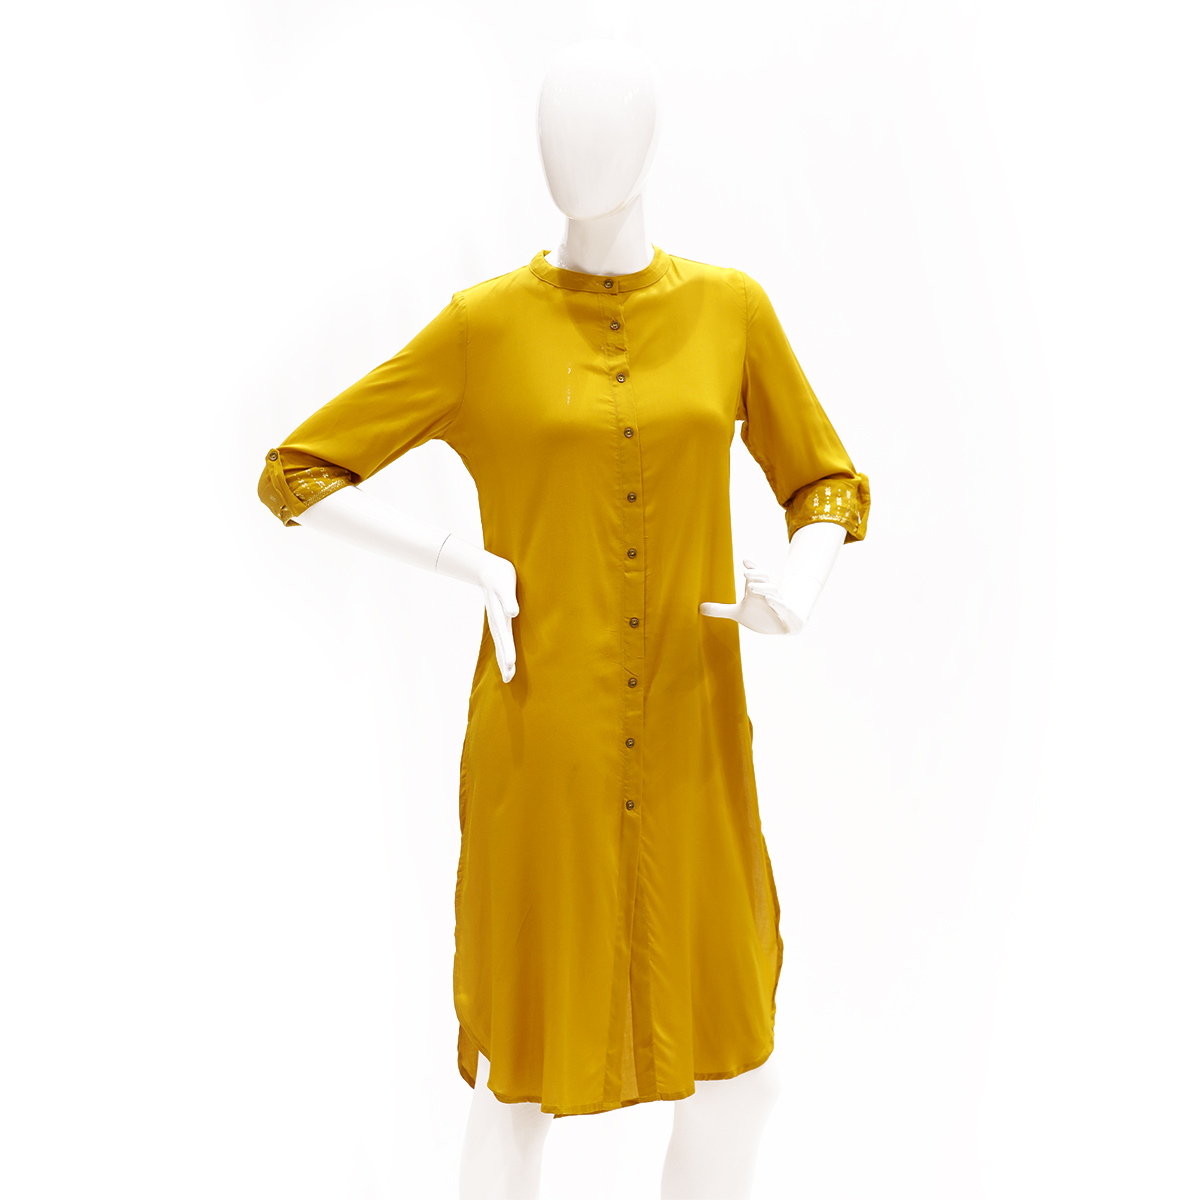 Desi Belle A Line Kurta With Flat Band Collar And Front Open Placket -Mustard